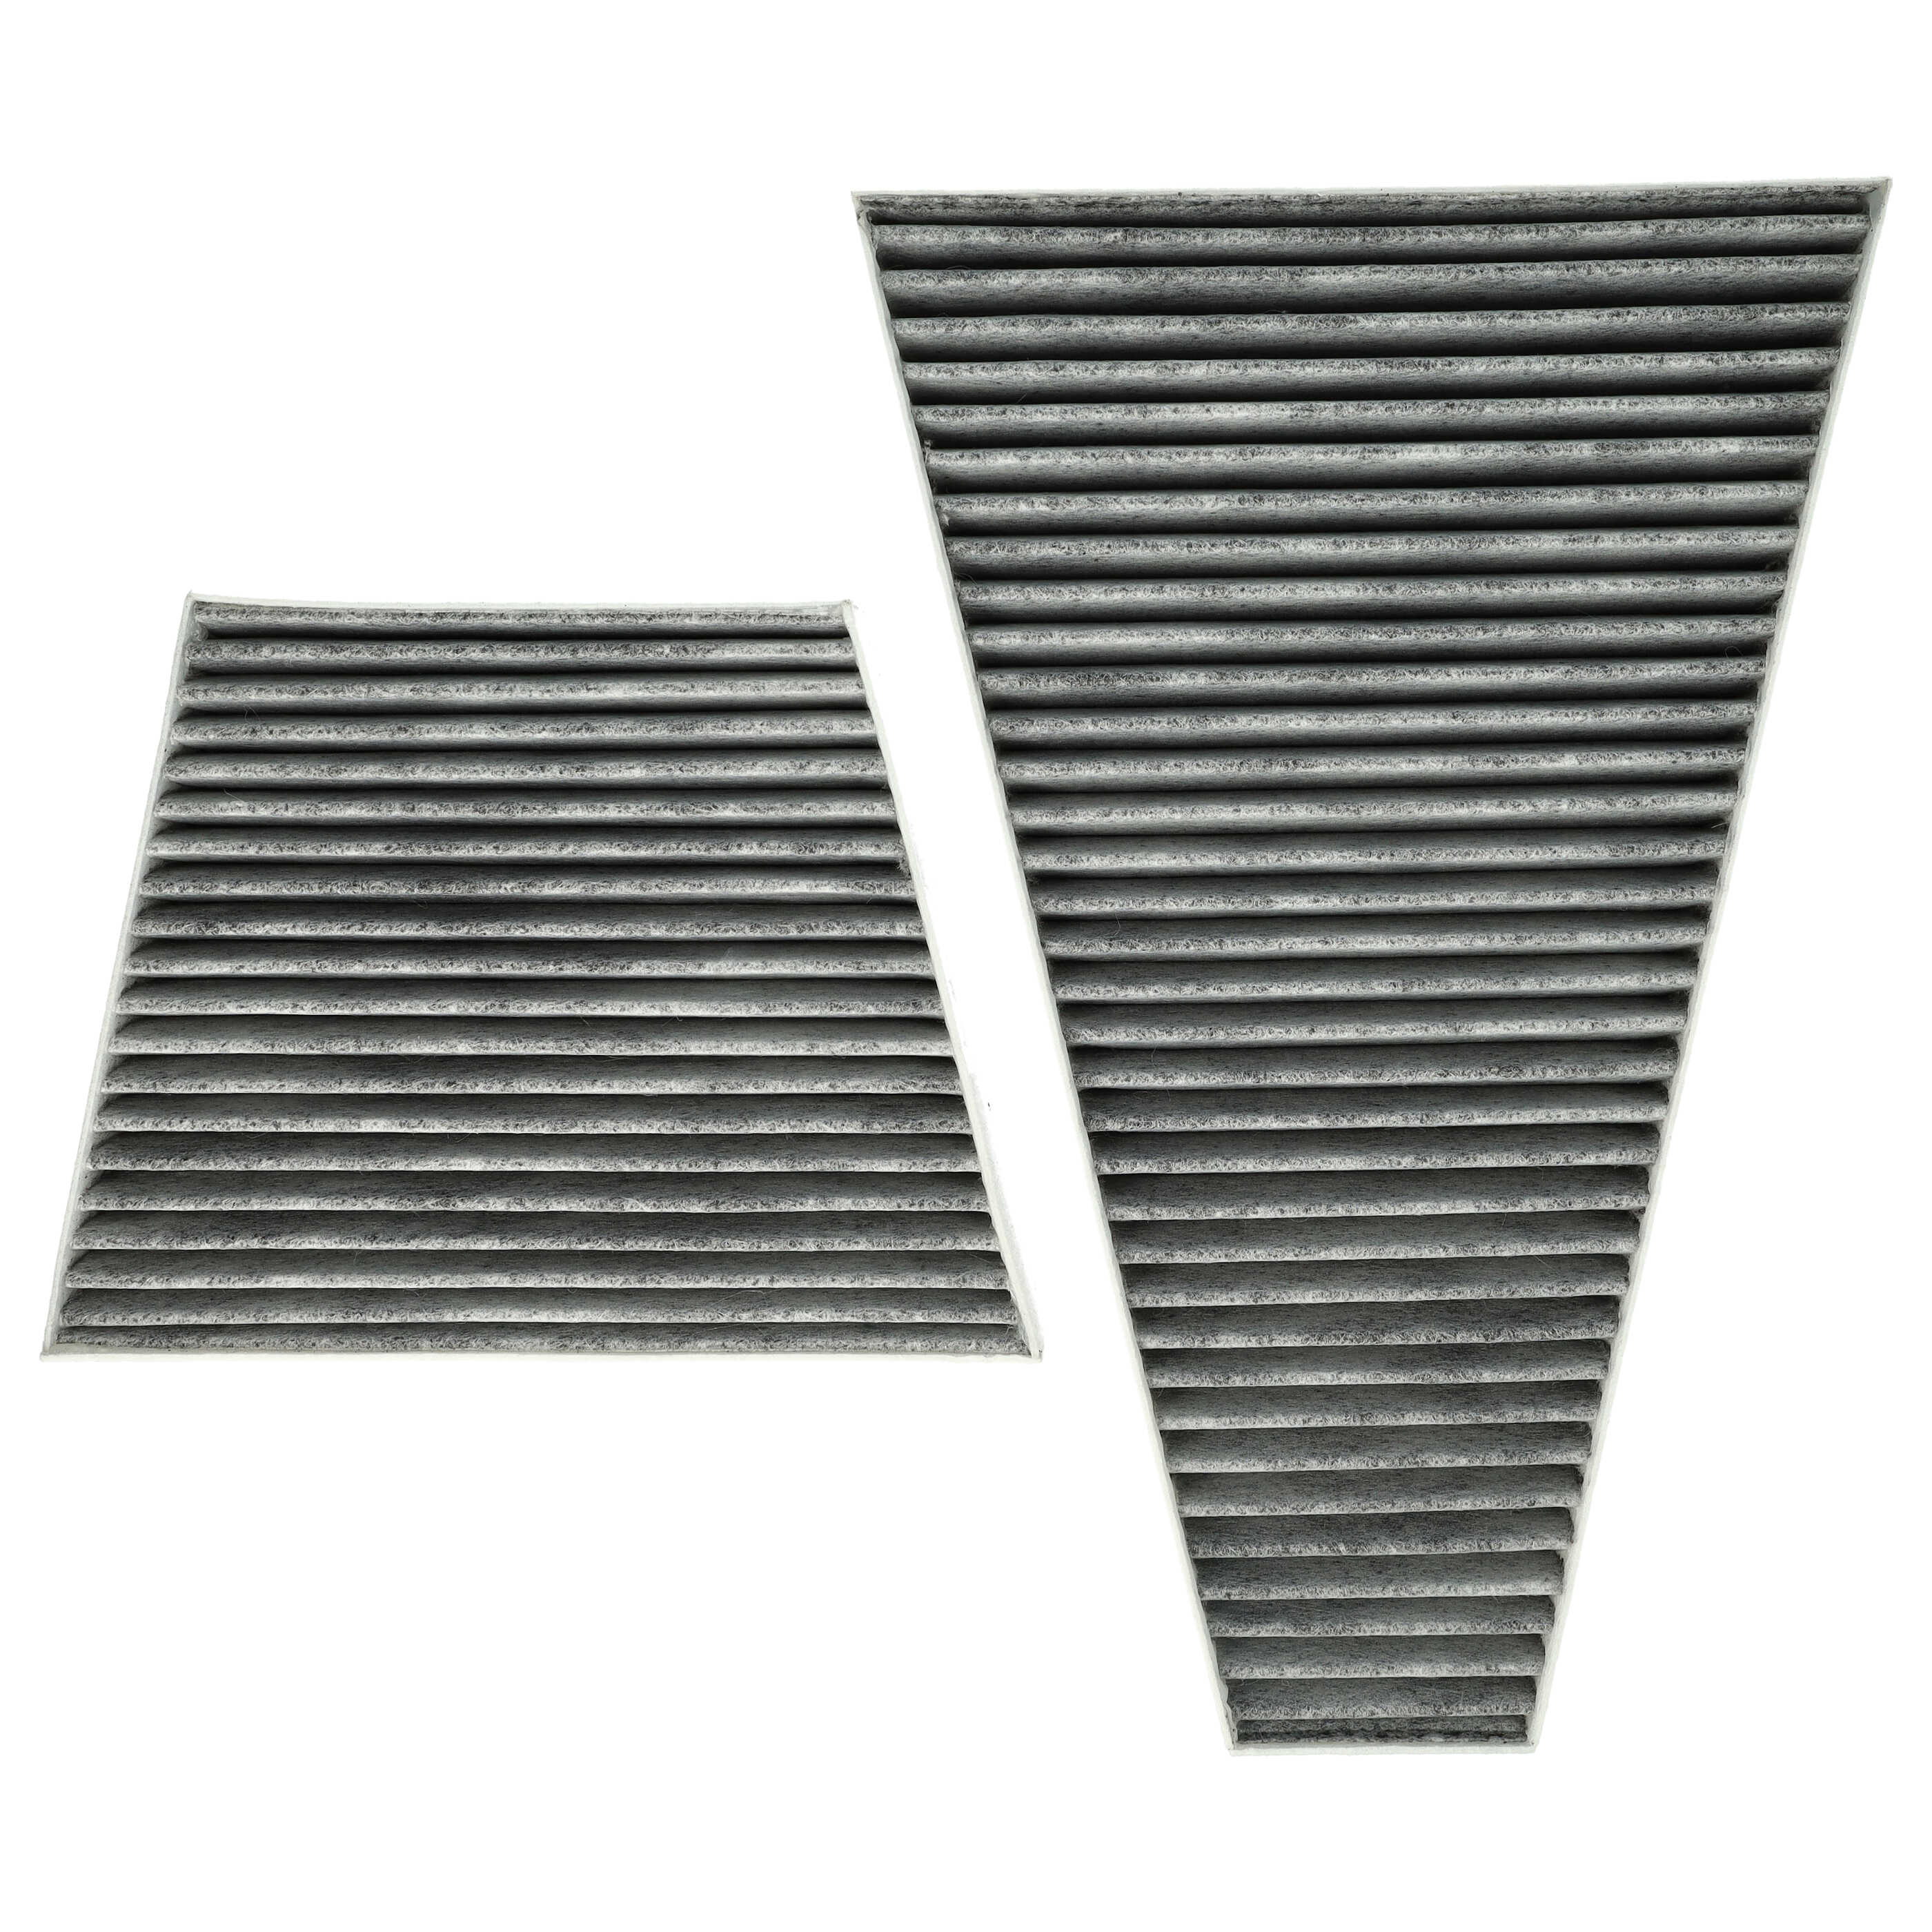 2x Cabin Air Filter replaces 1A First Automotive K30383-2 etc.